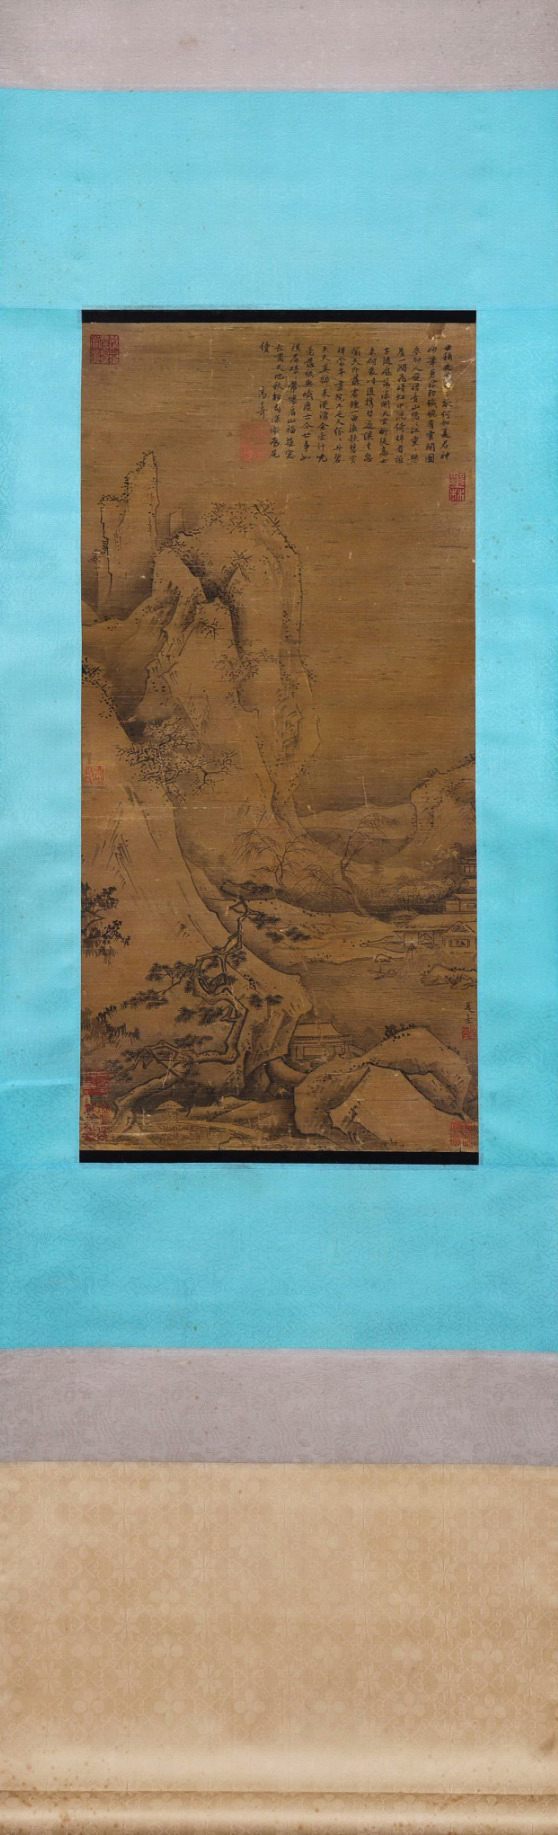 A Chinese Scroll Painting Signed Xia Gui - Image 9 of 9